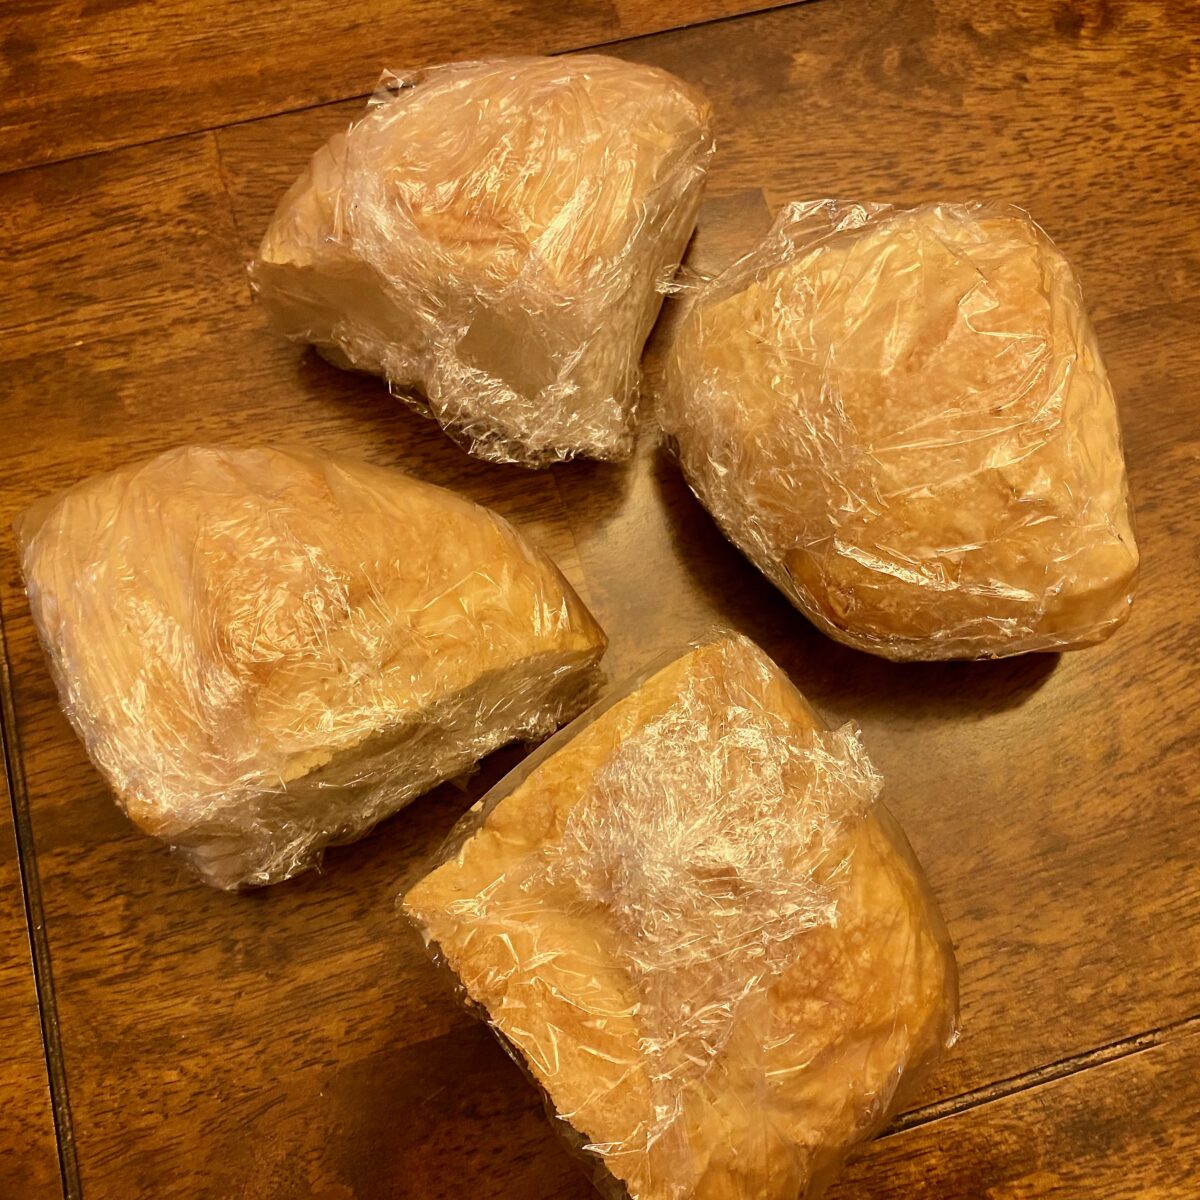 After cooling completely, the loaf has been cut into quarters and wrapped in plastic for freezing. That is, if you don't eat it all at once!